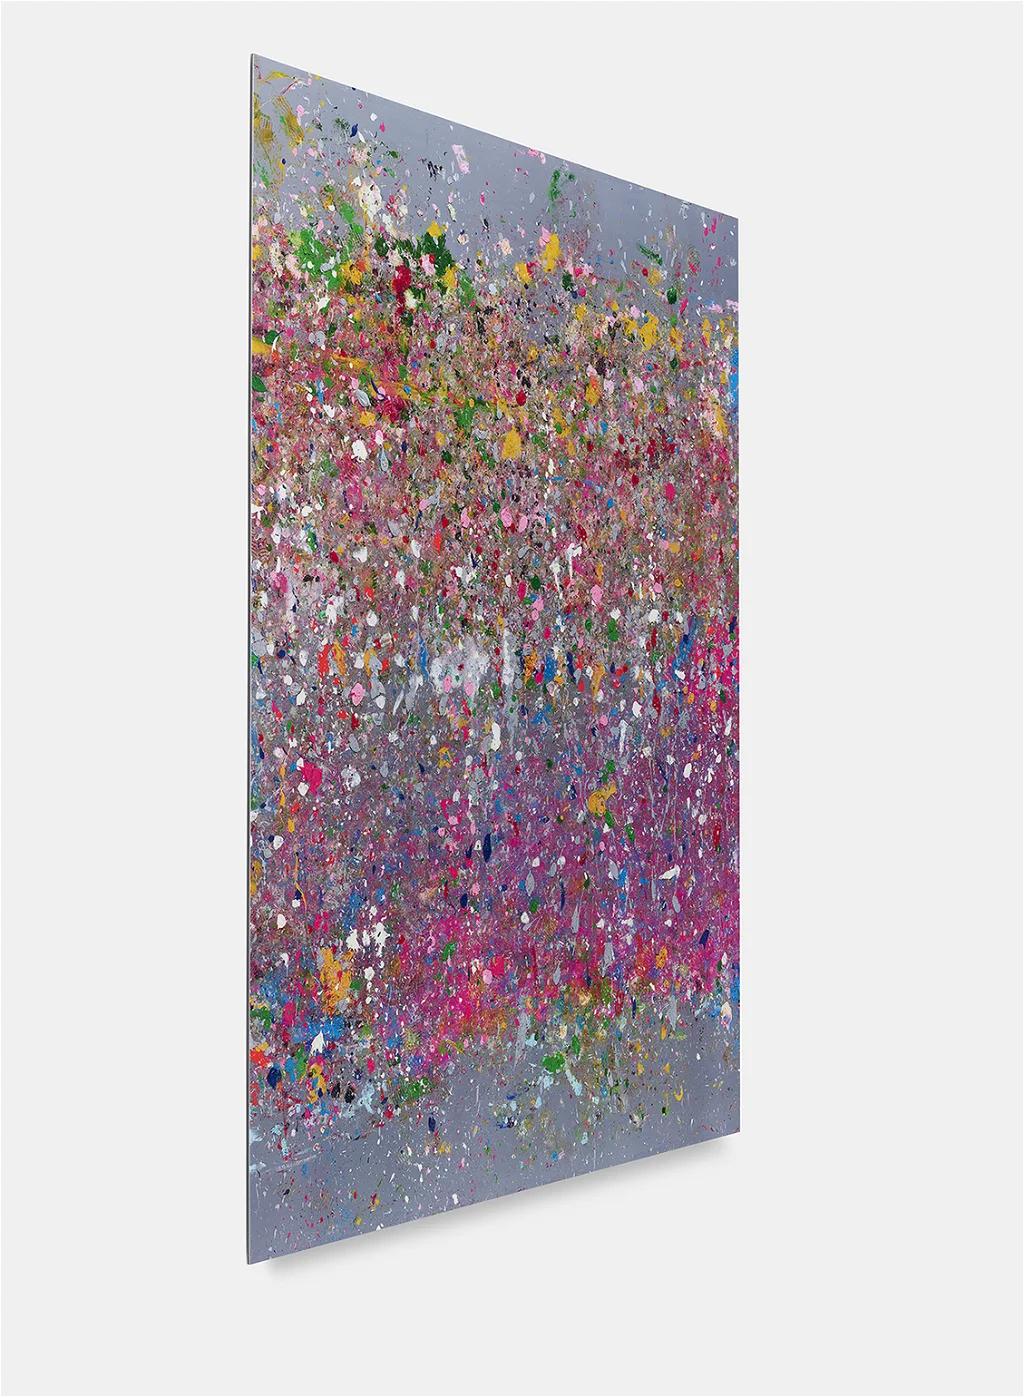 DAMIEN HIRST - STUDLAND BAY. Where the land meets the sea. Abstraction, British - Gray Abstract Print by Damien Hirst